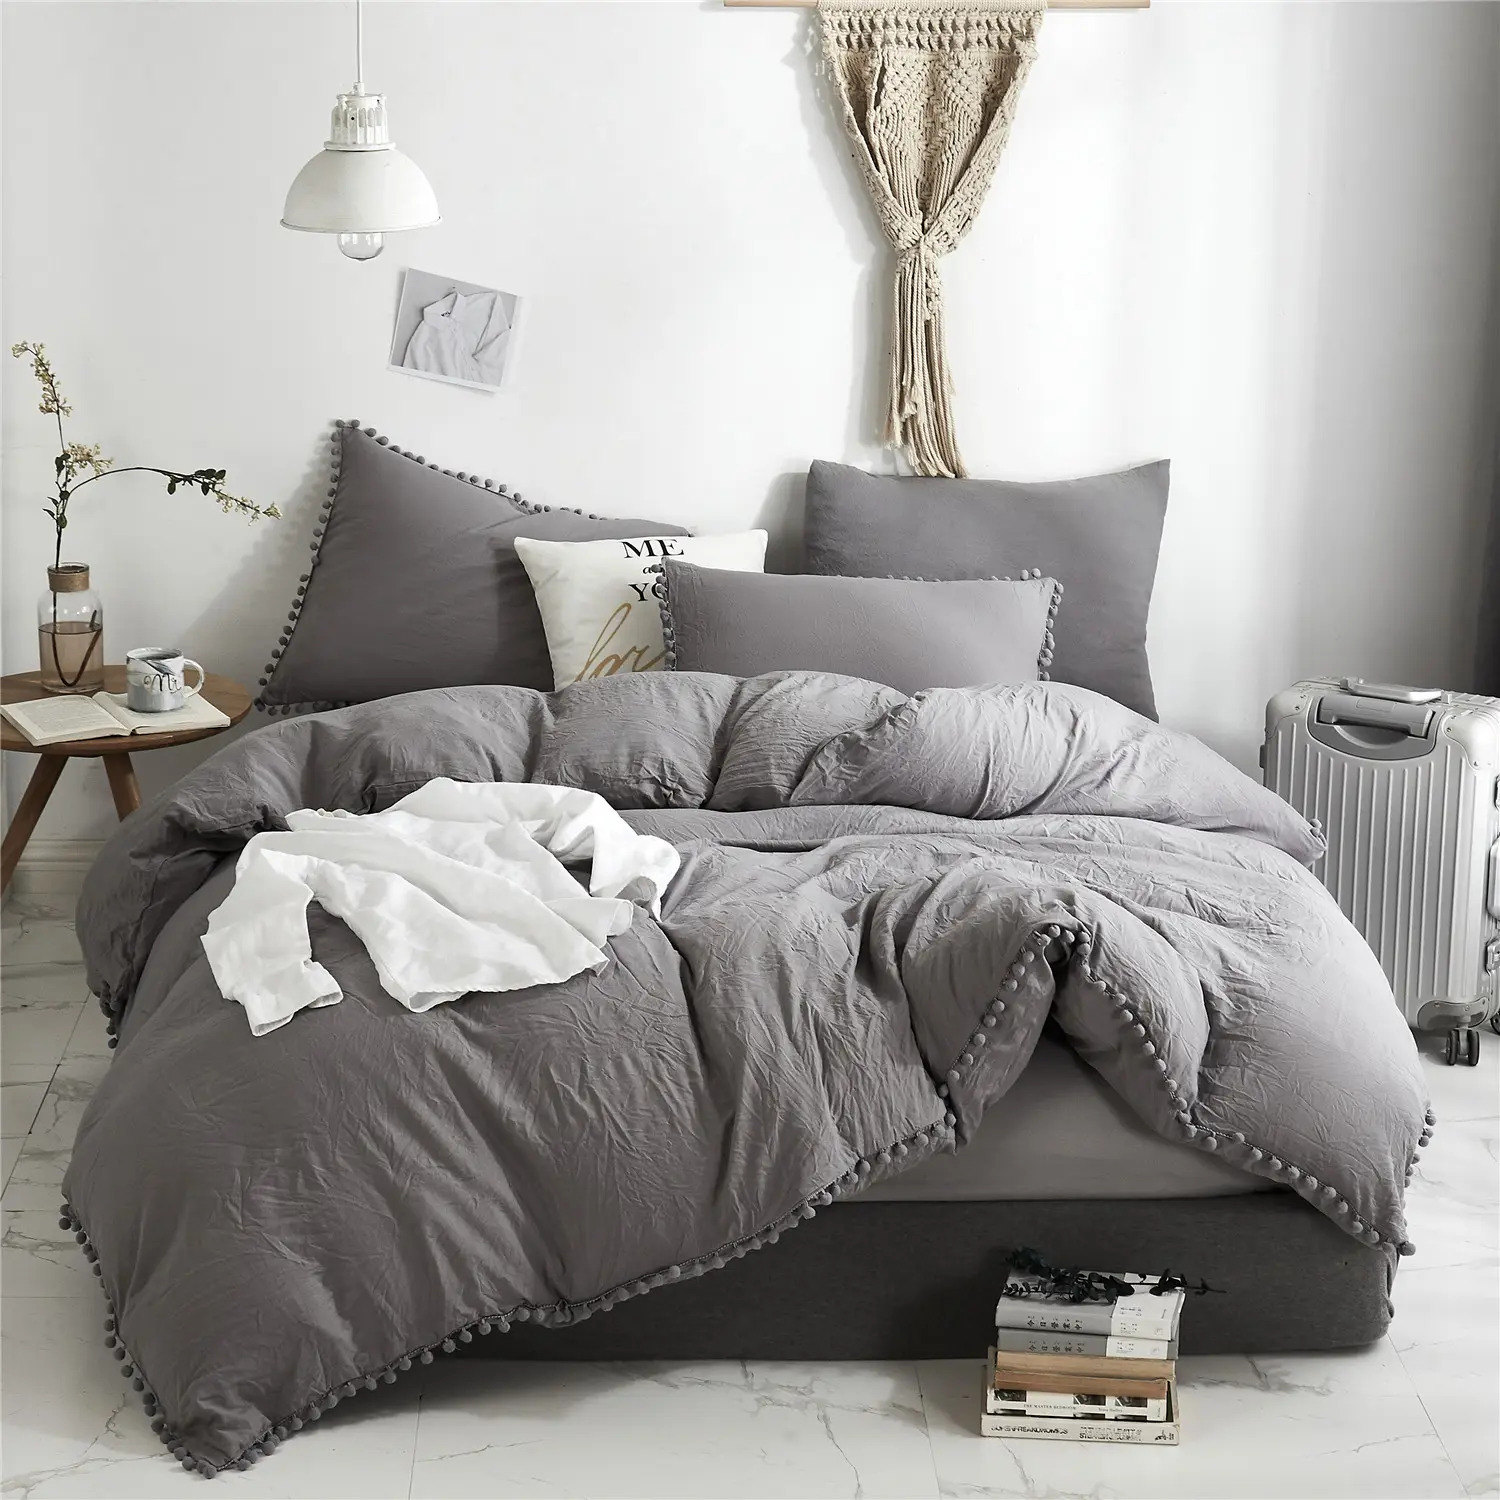 Natural super soft color washed cotton bedding set modern style duvet cover with zipper closure